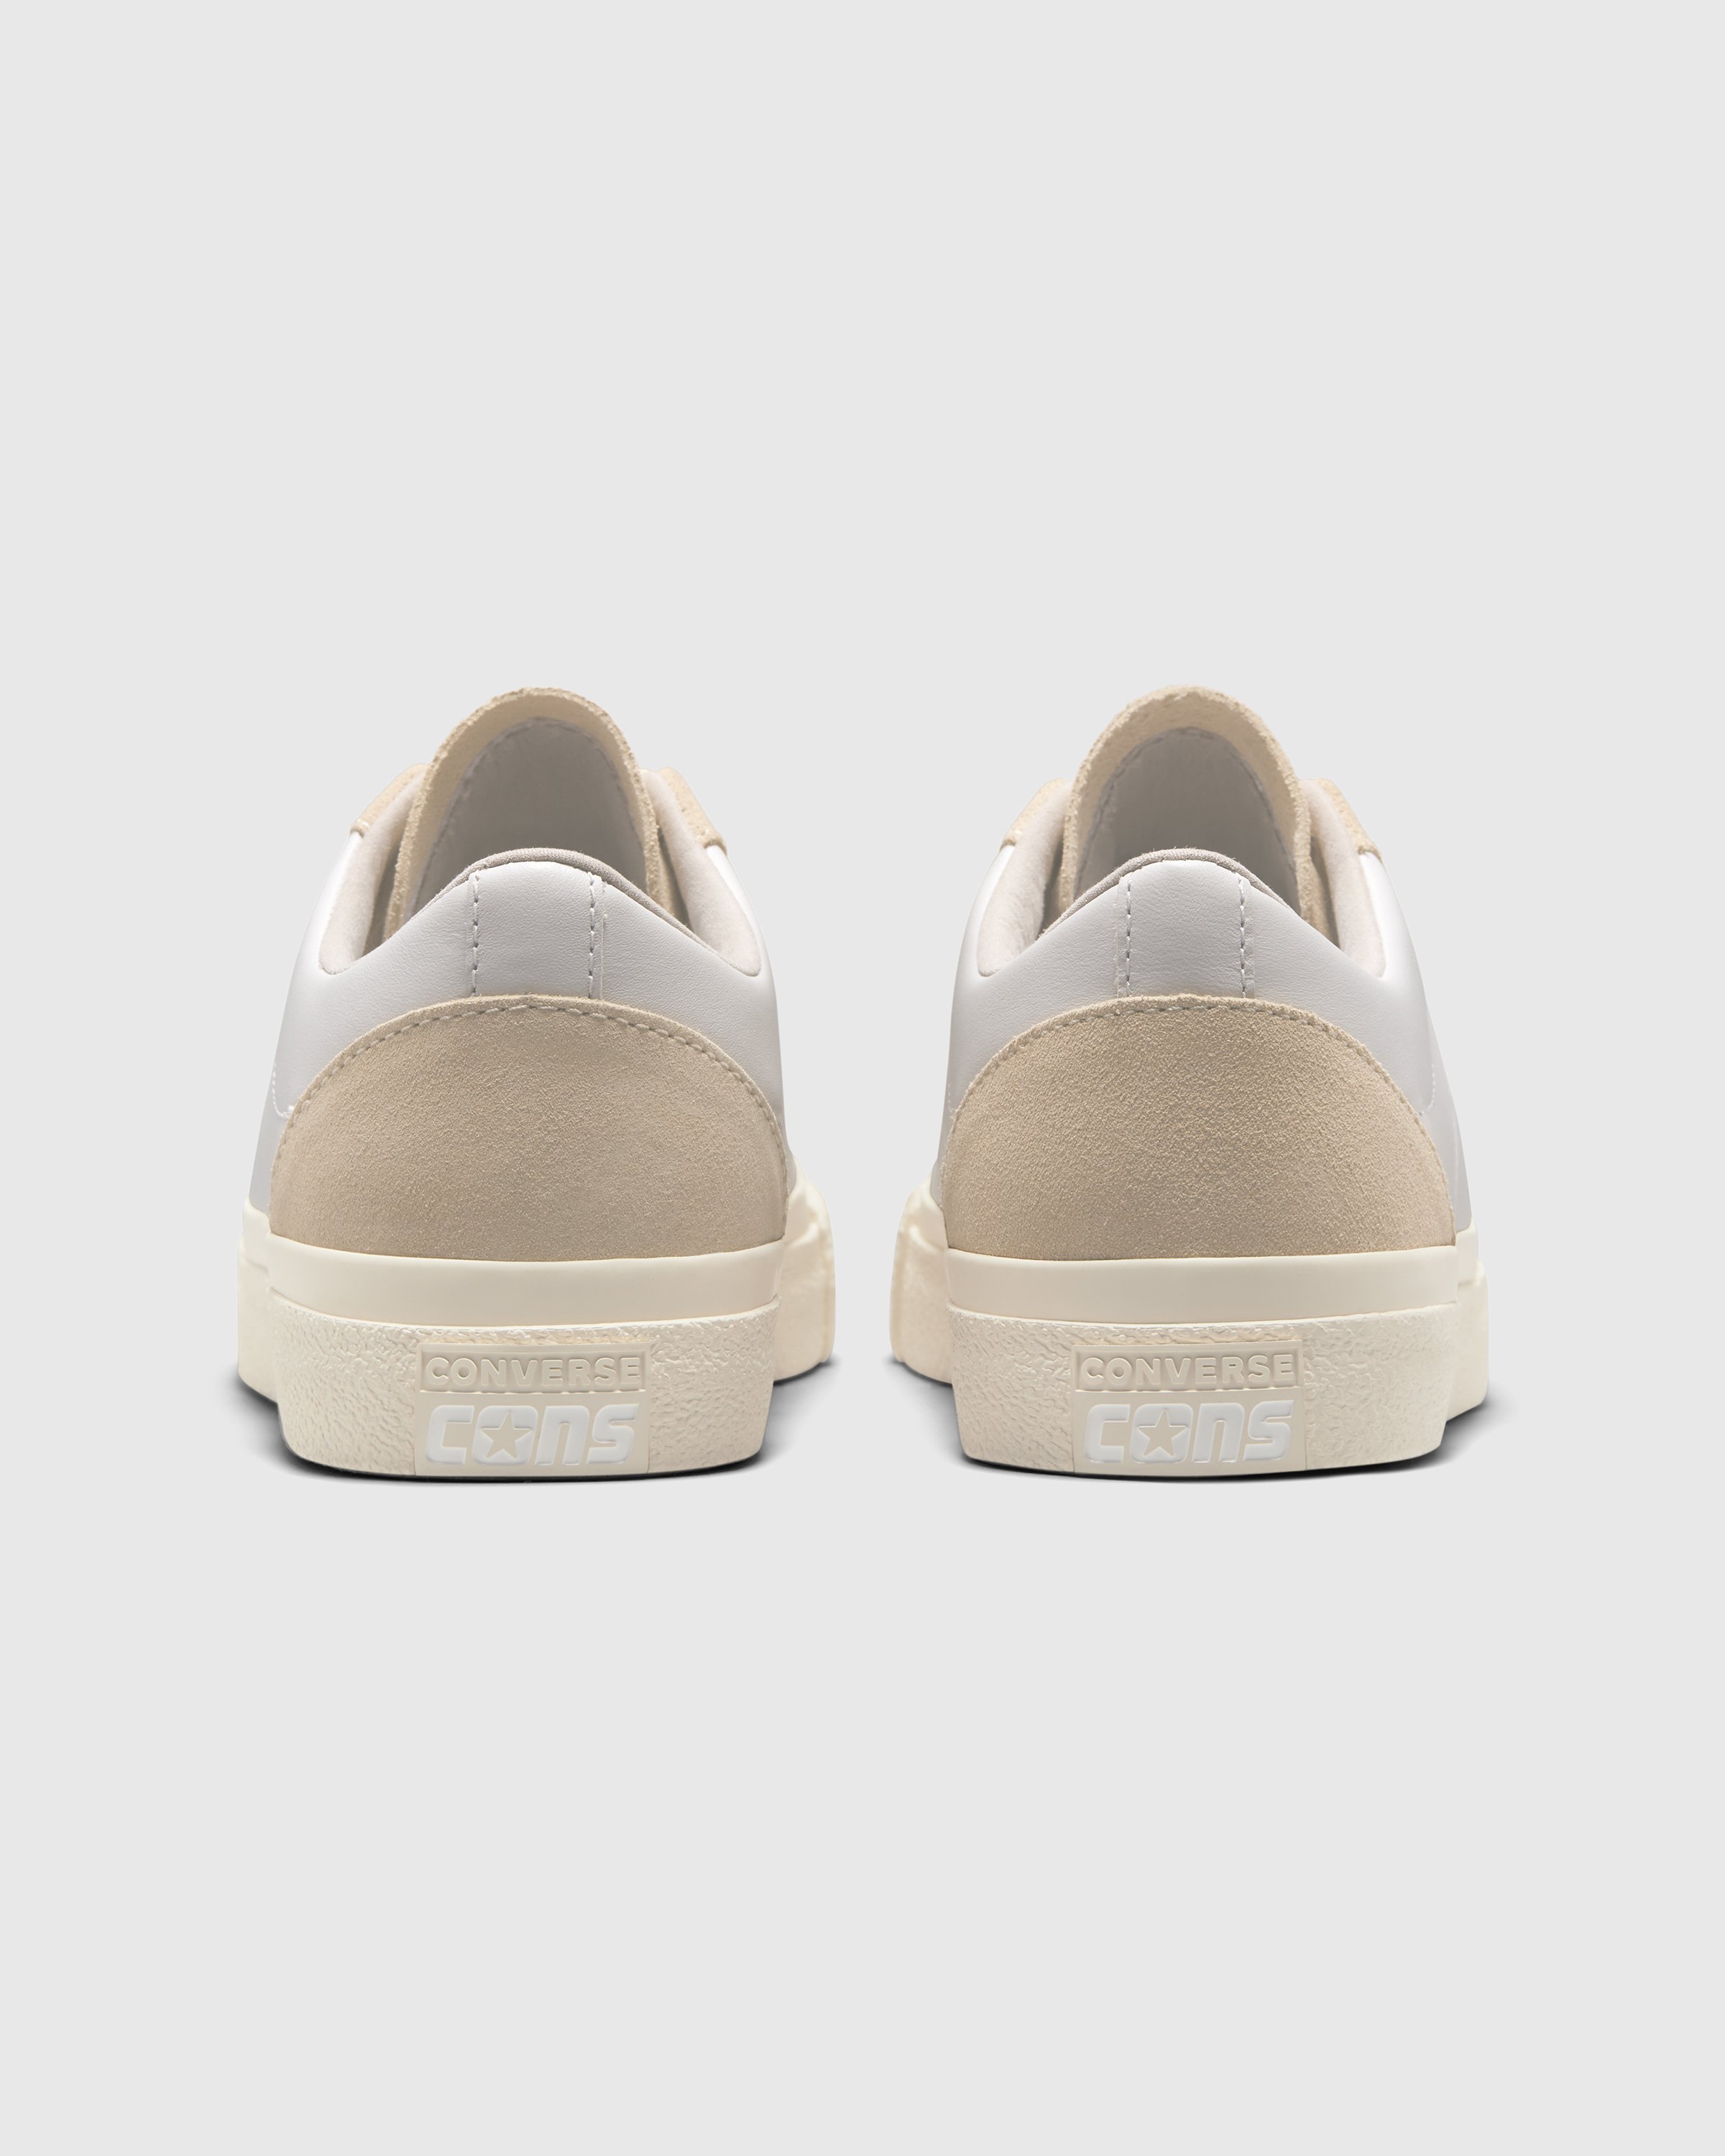 Converse - One Star Pro Ox South of Houston Pale Putty/Natural Ivory - Footwear - White - Image 4